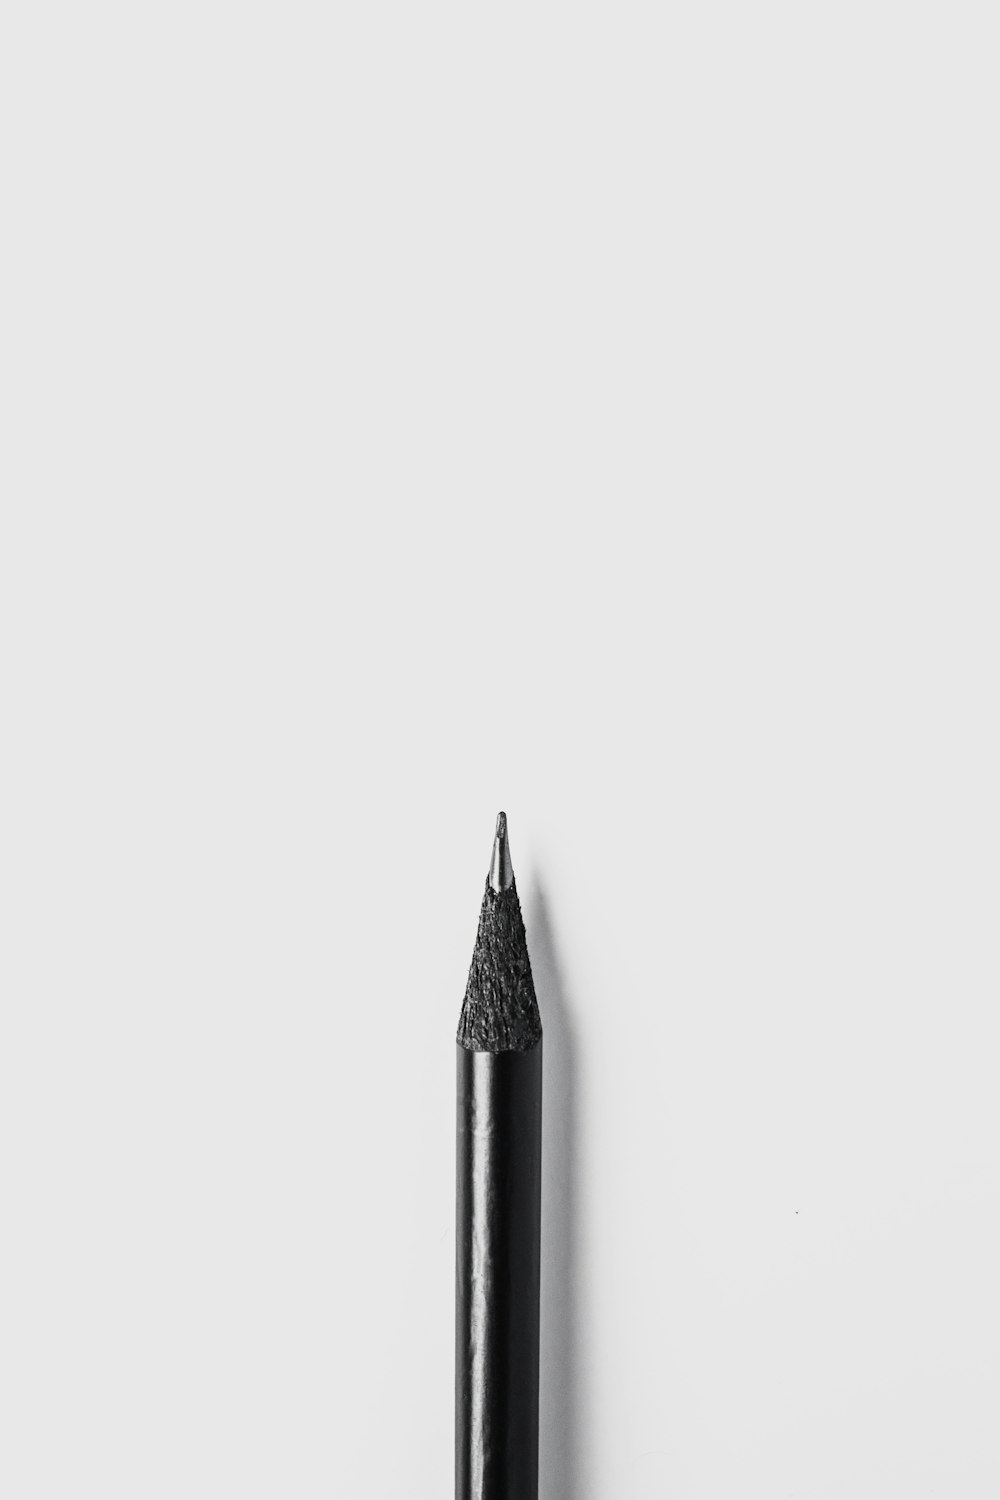 black pencil on white surface